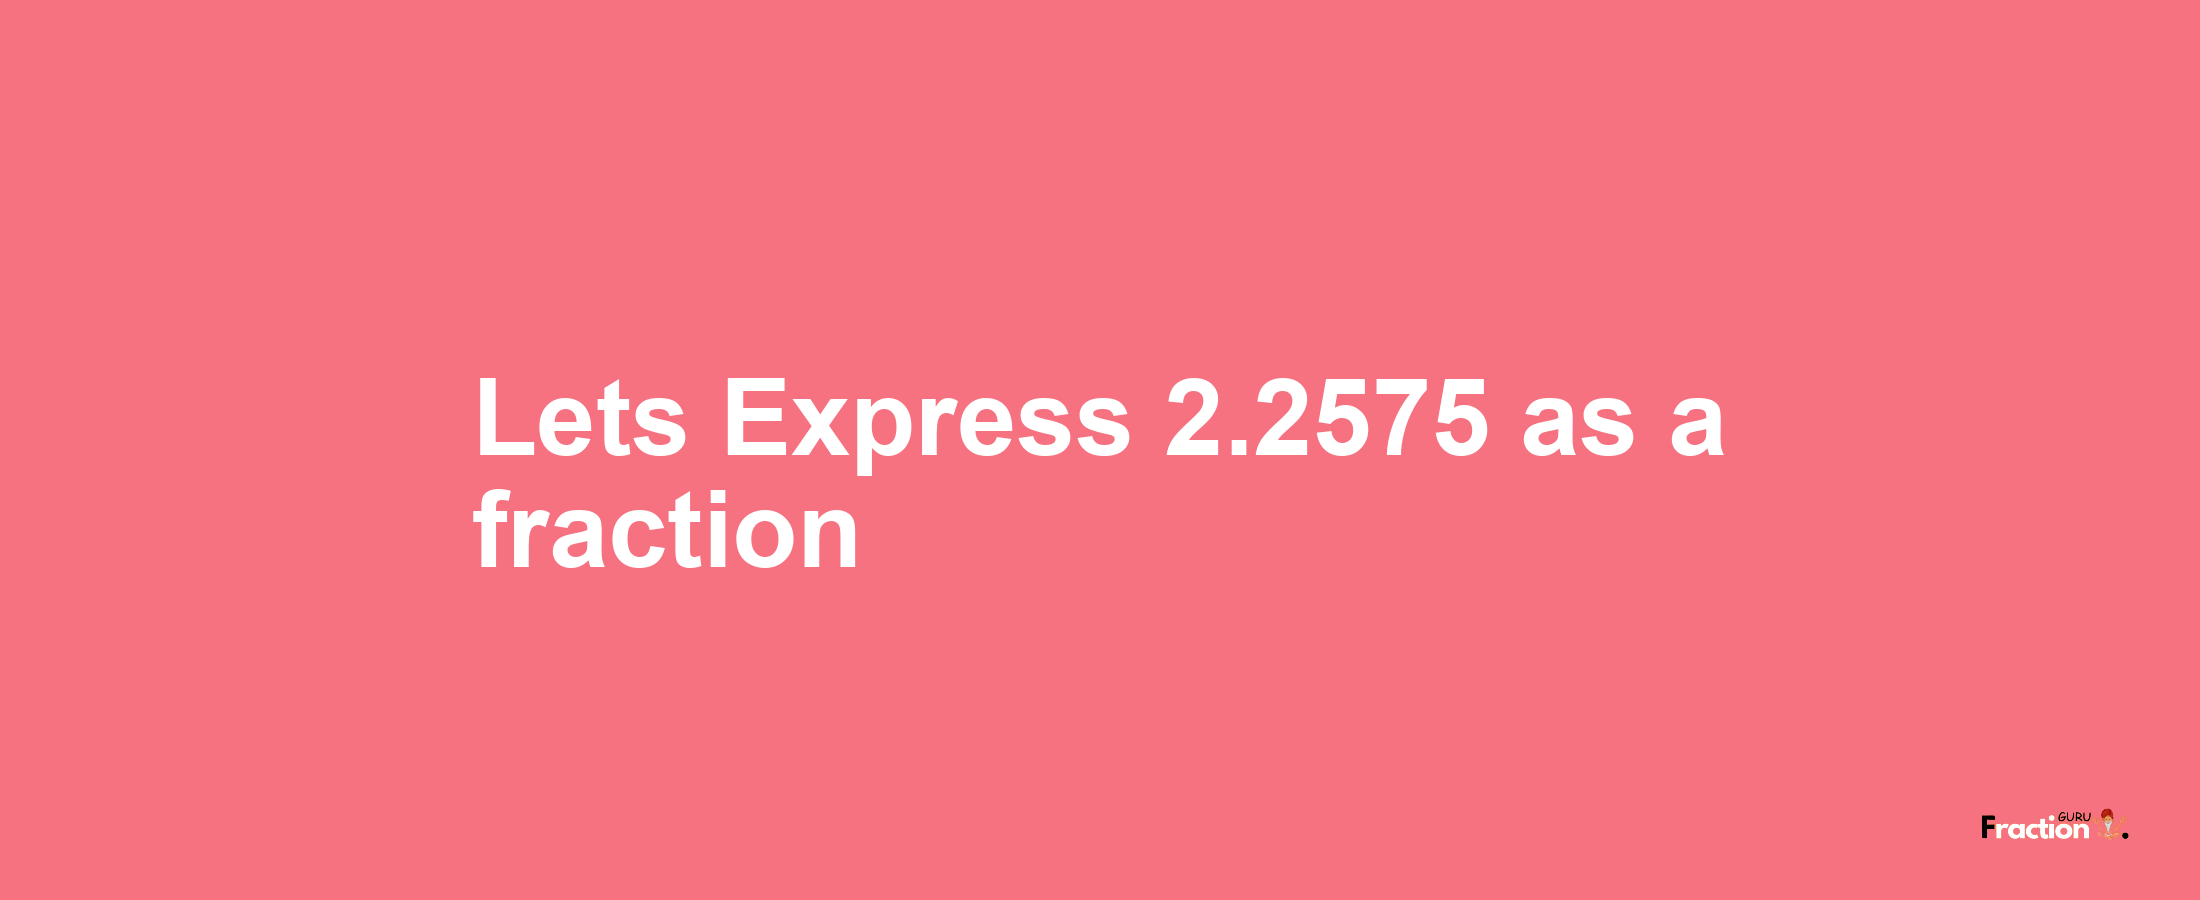 Lets Express 2.2575 as afraction